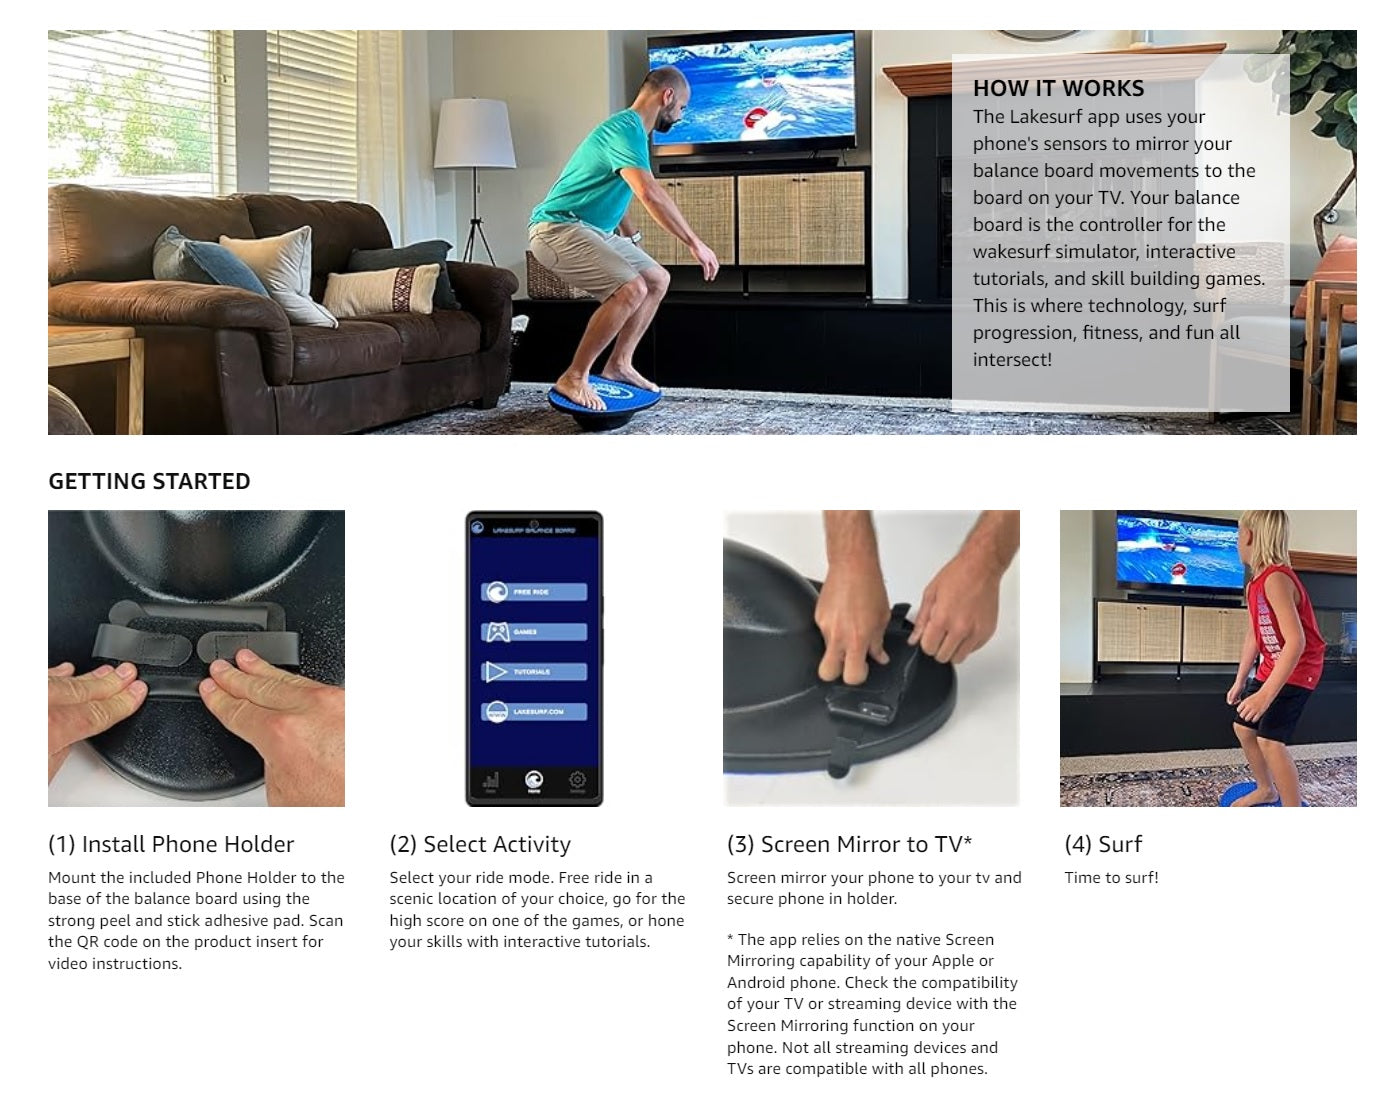 Wakesurf Balance Board Training System by Lakesurf with a breakdown of how the phone holder works with the board, device app, and mirroring to the tv.